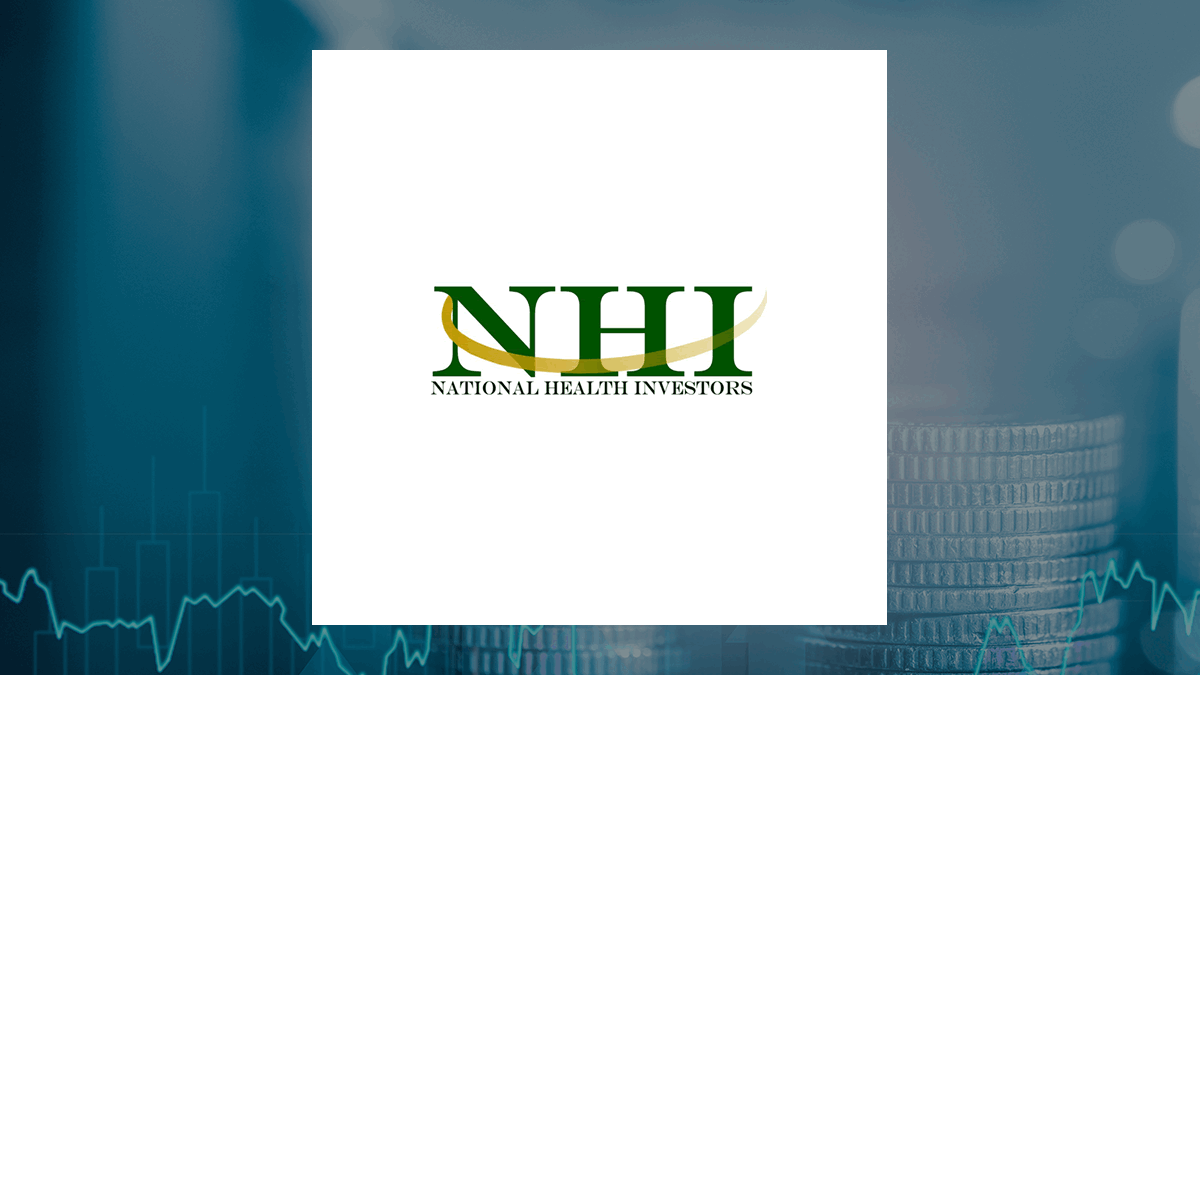 National Health Investors logo with Finance background